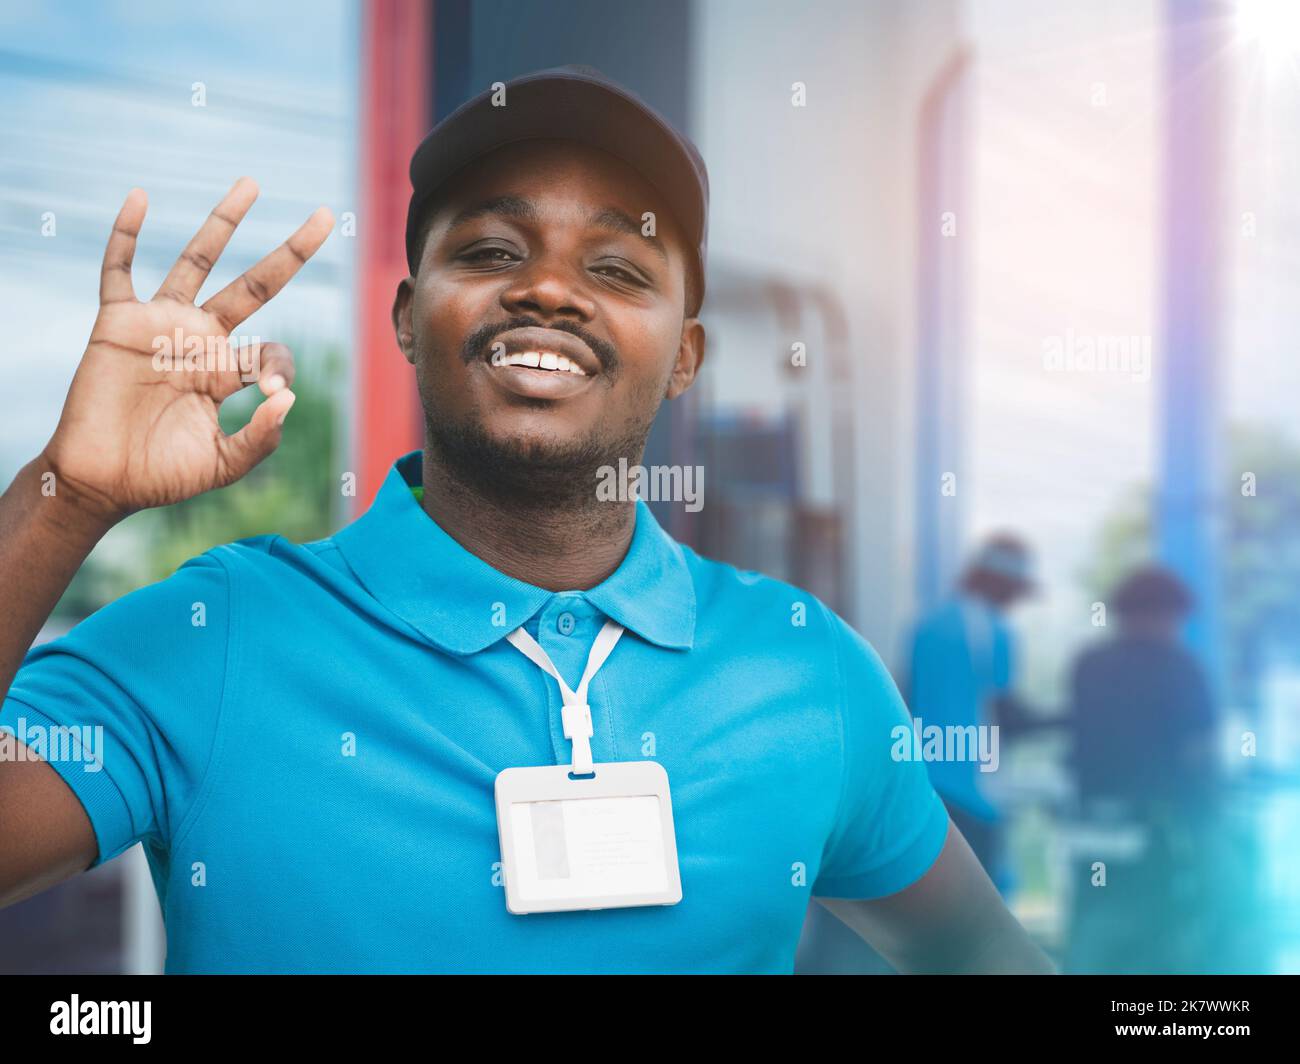 Uniform african man gas station worker refueling a car. Gas station worker filling up fuel into car with smile Stock Photo